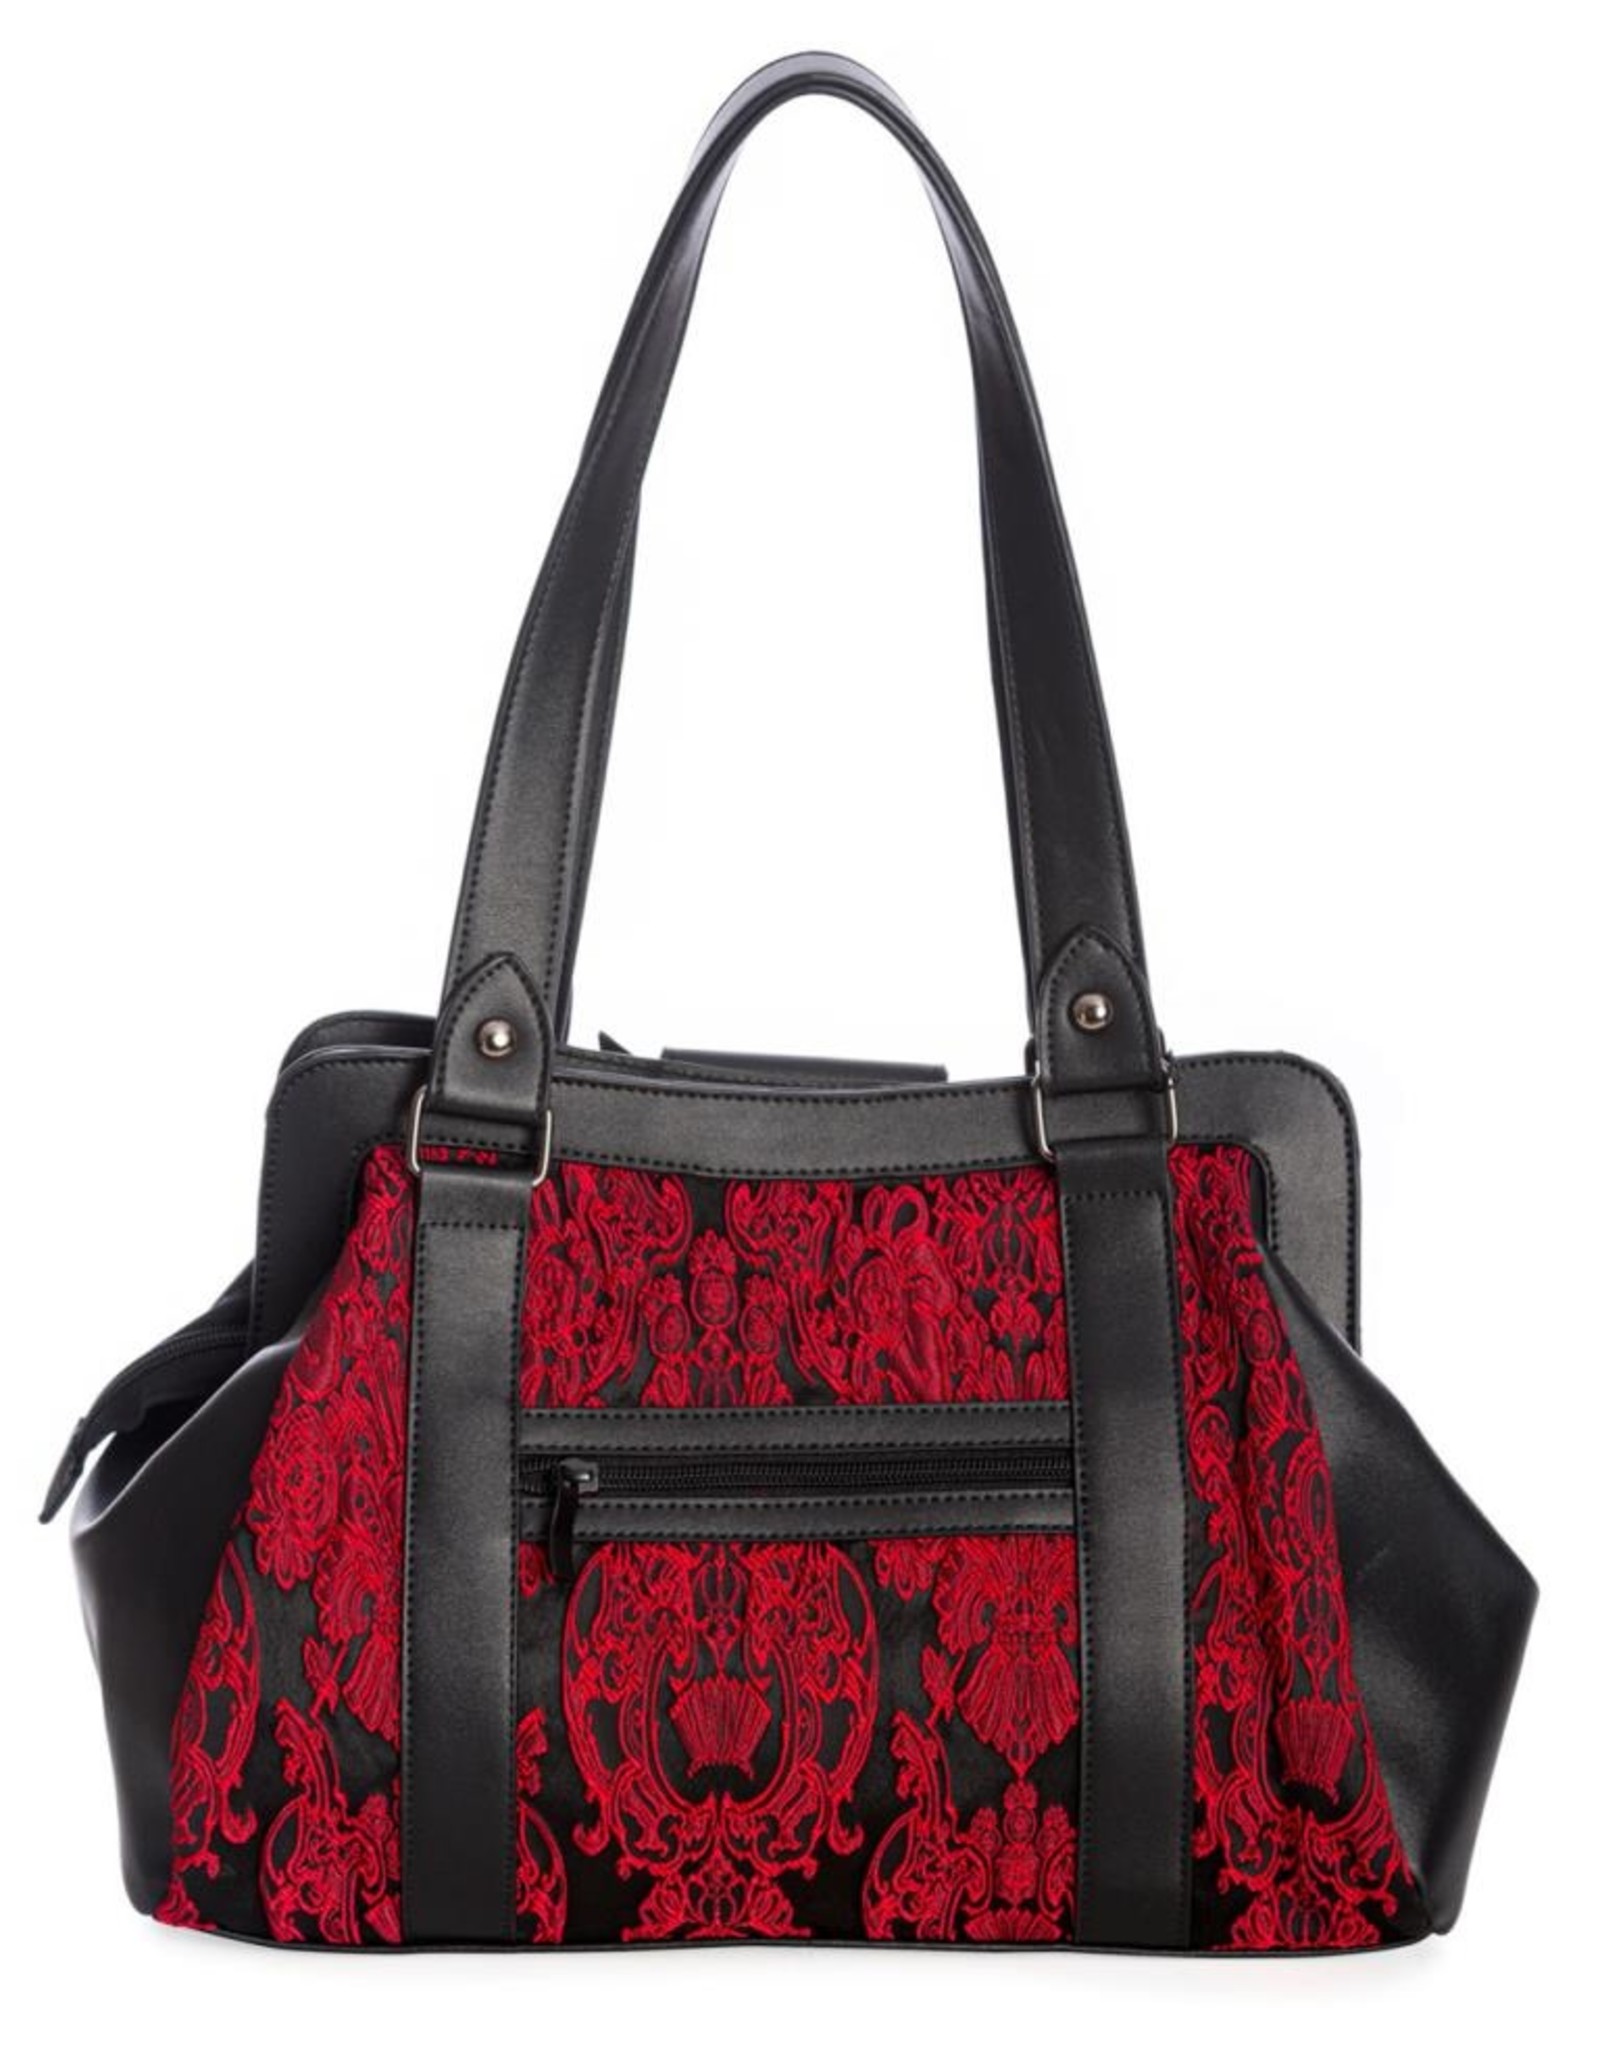 Banned Gothic bags Steampunk bags - Banned Maplesage Gothic Handbag black-red